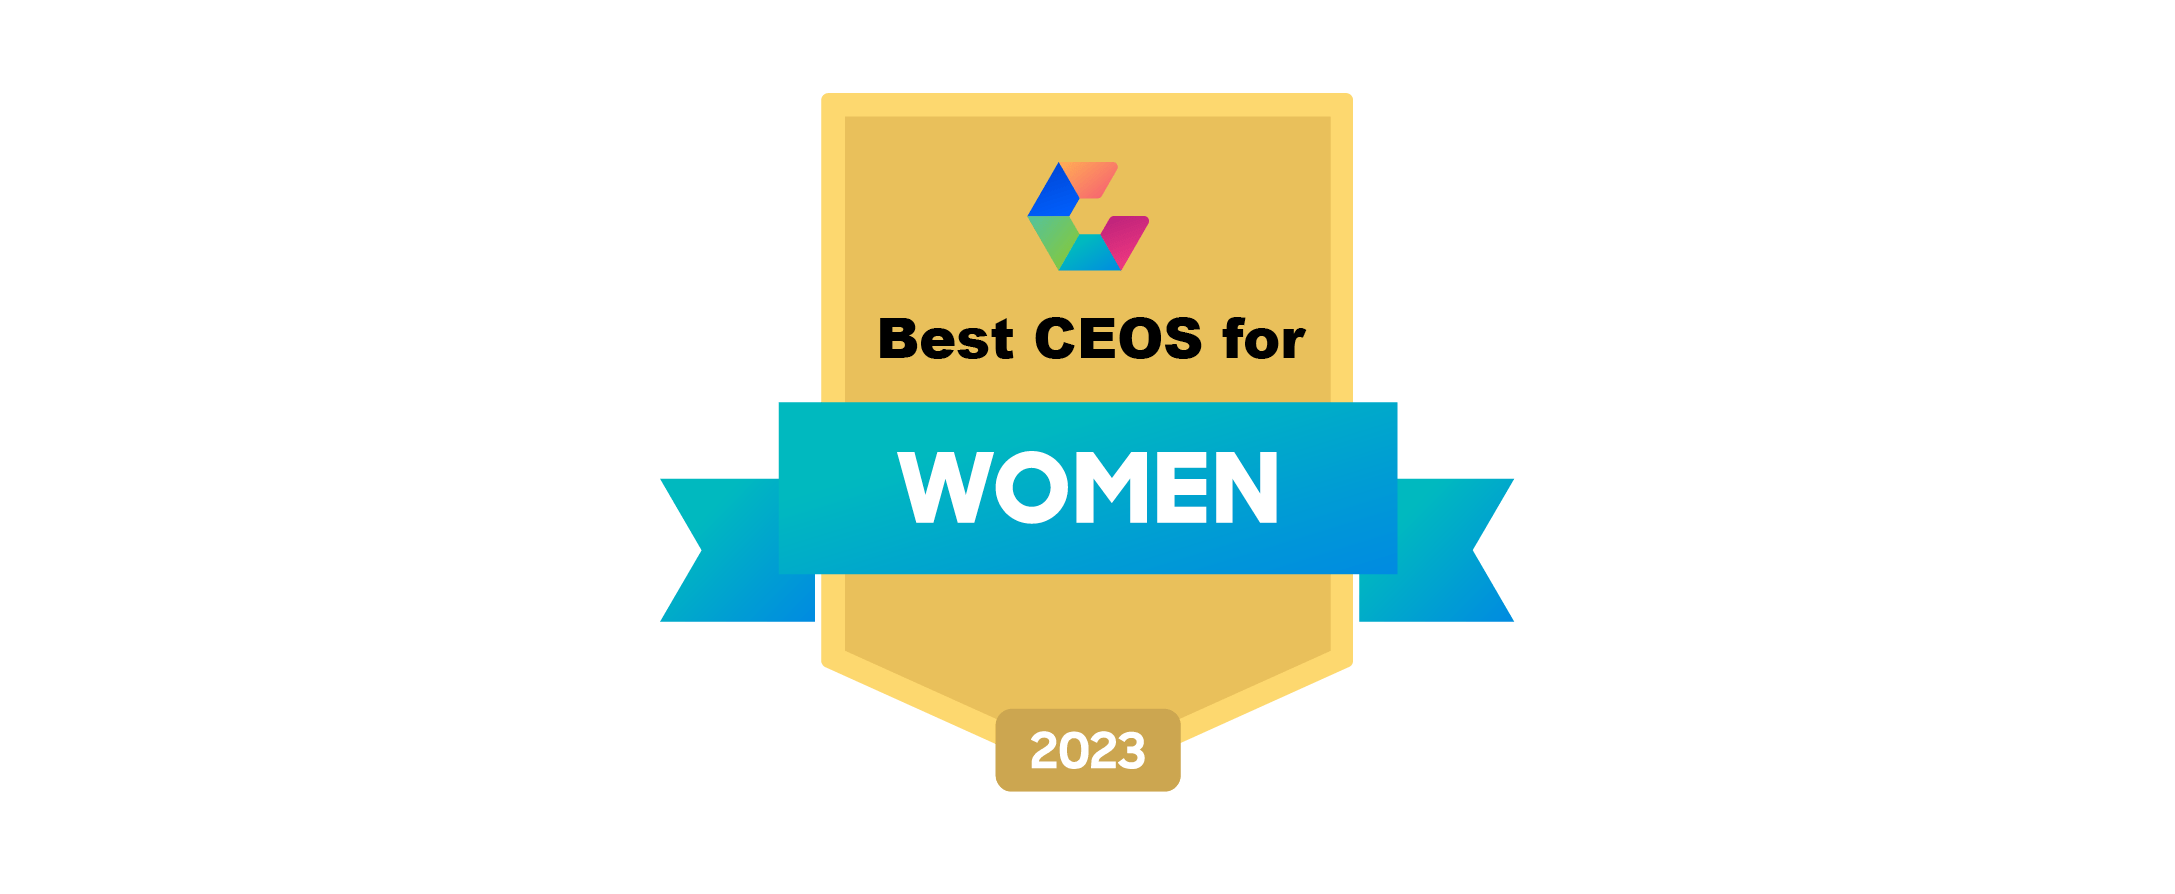 Comparably best CEO for women 2